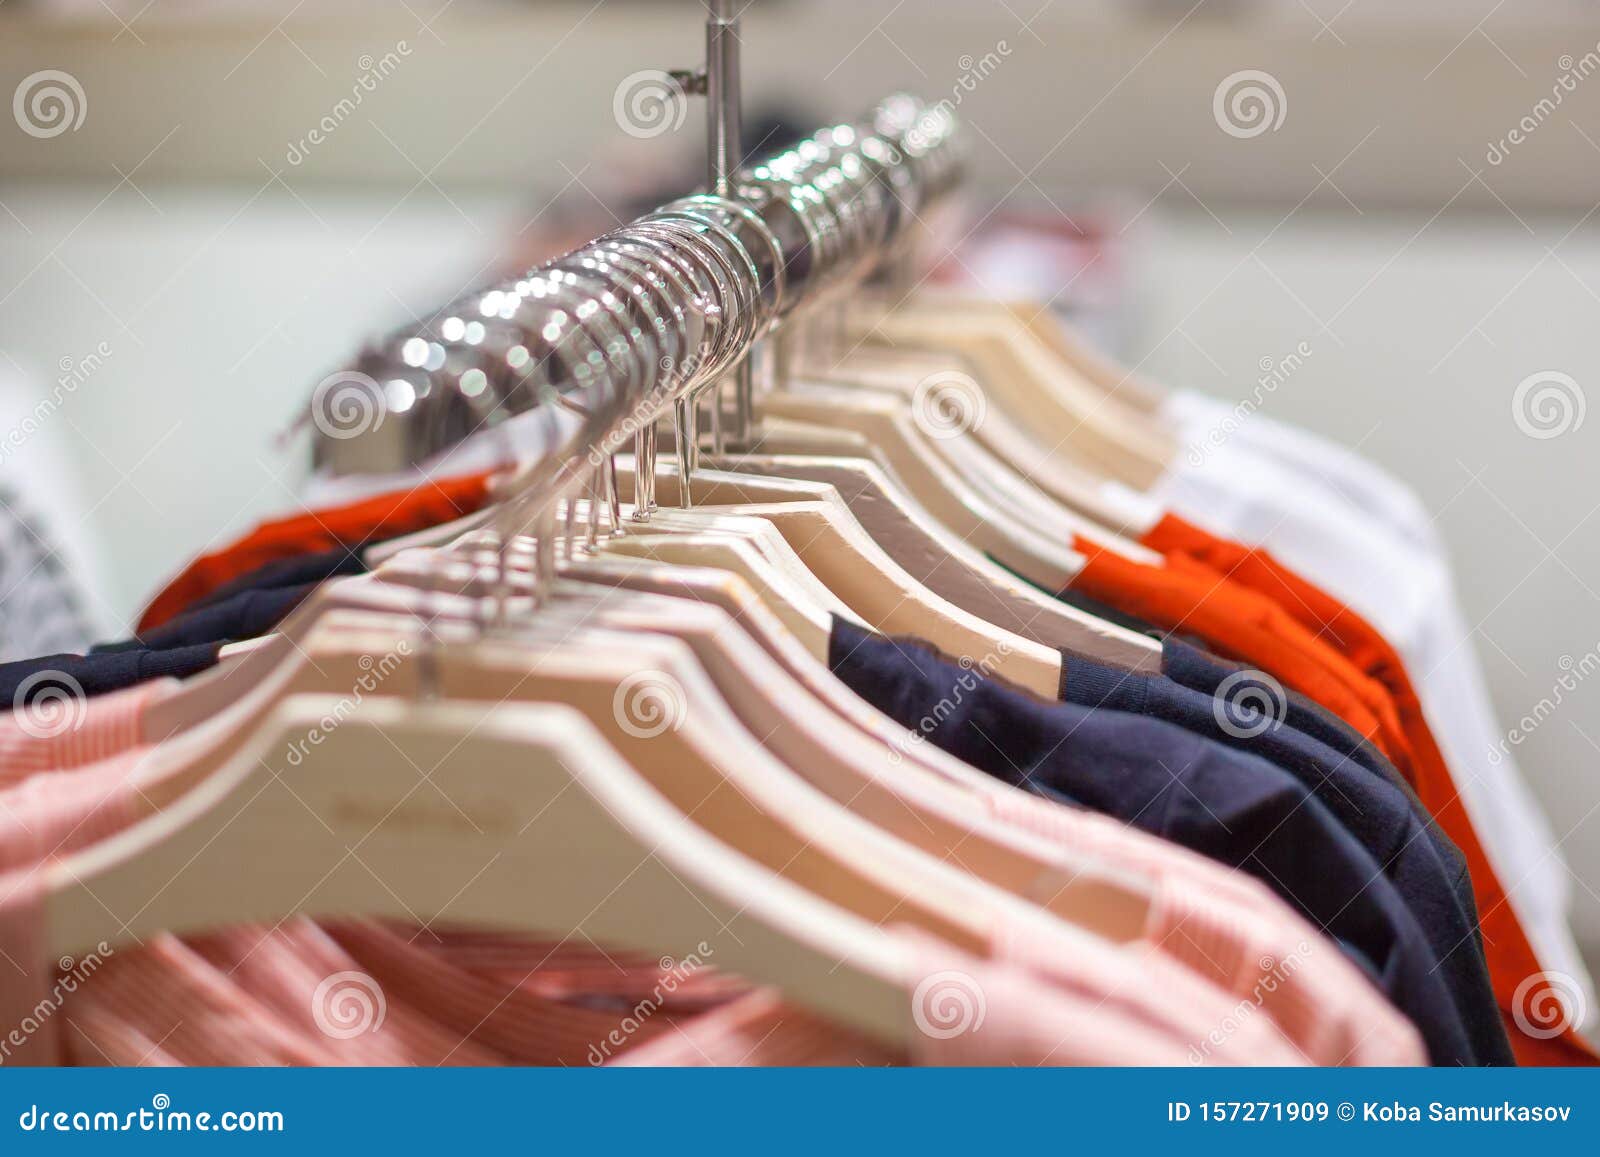 Clothes Hang on a Shelf. Clothes Hanger Showcase in Store Shopping ...